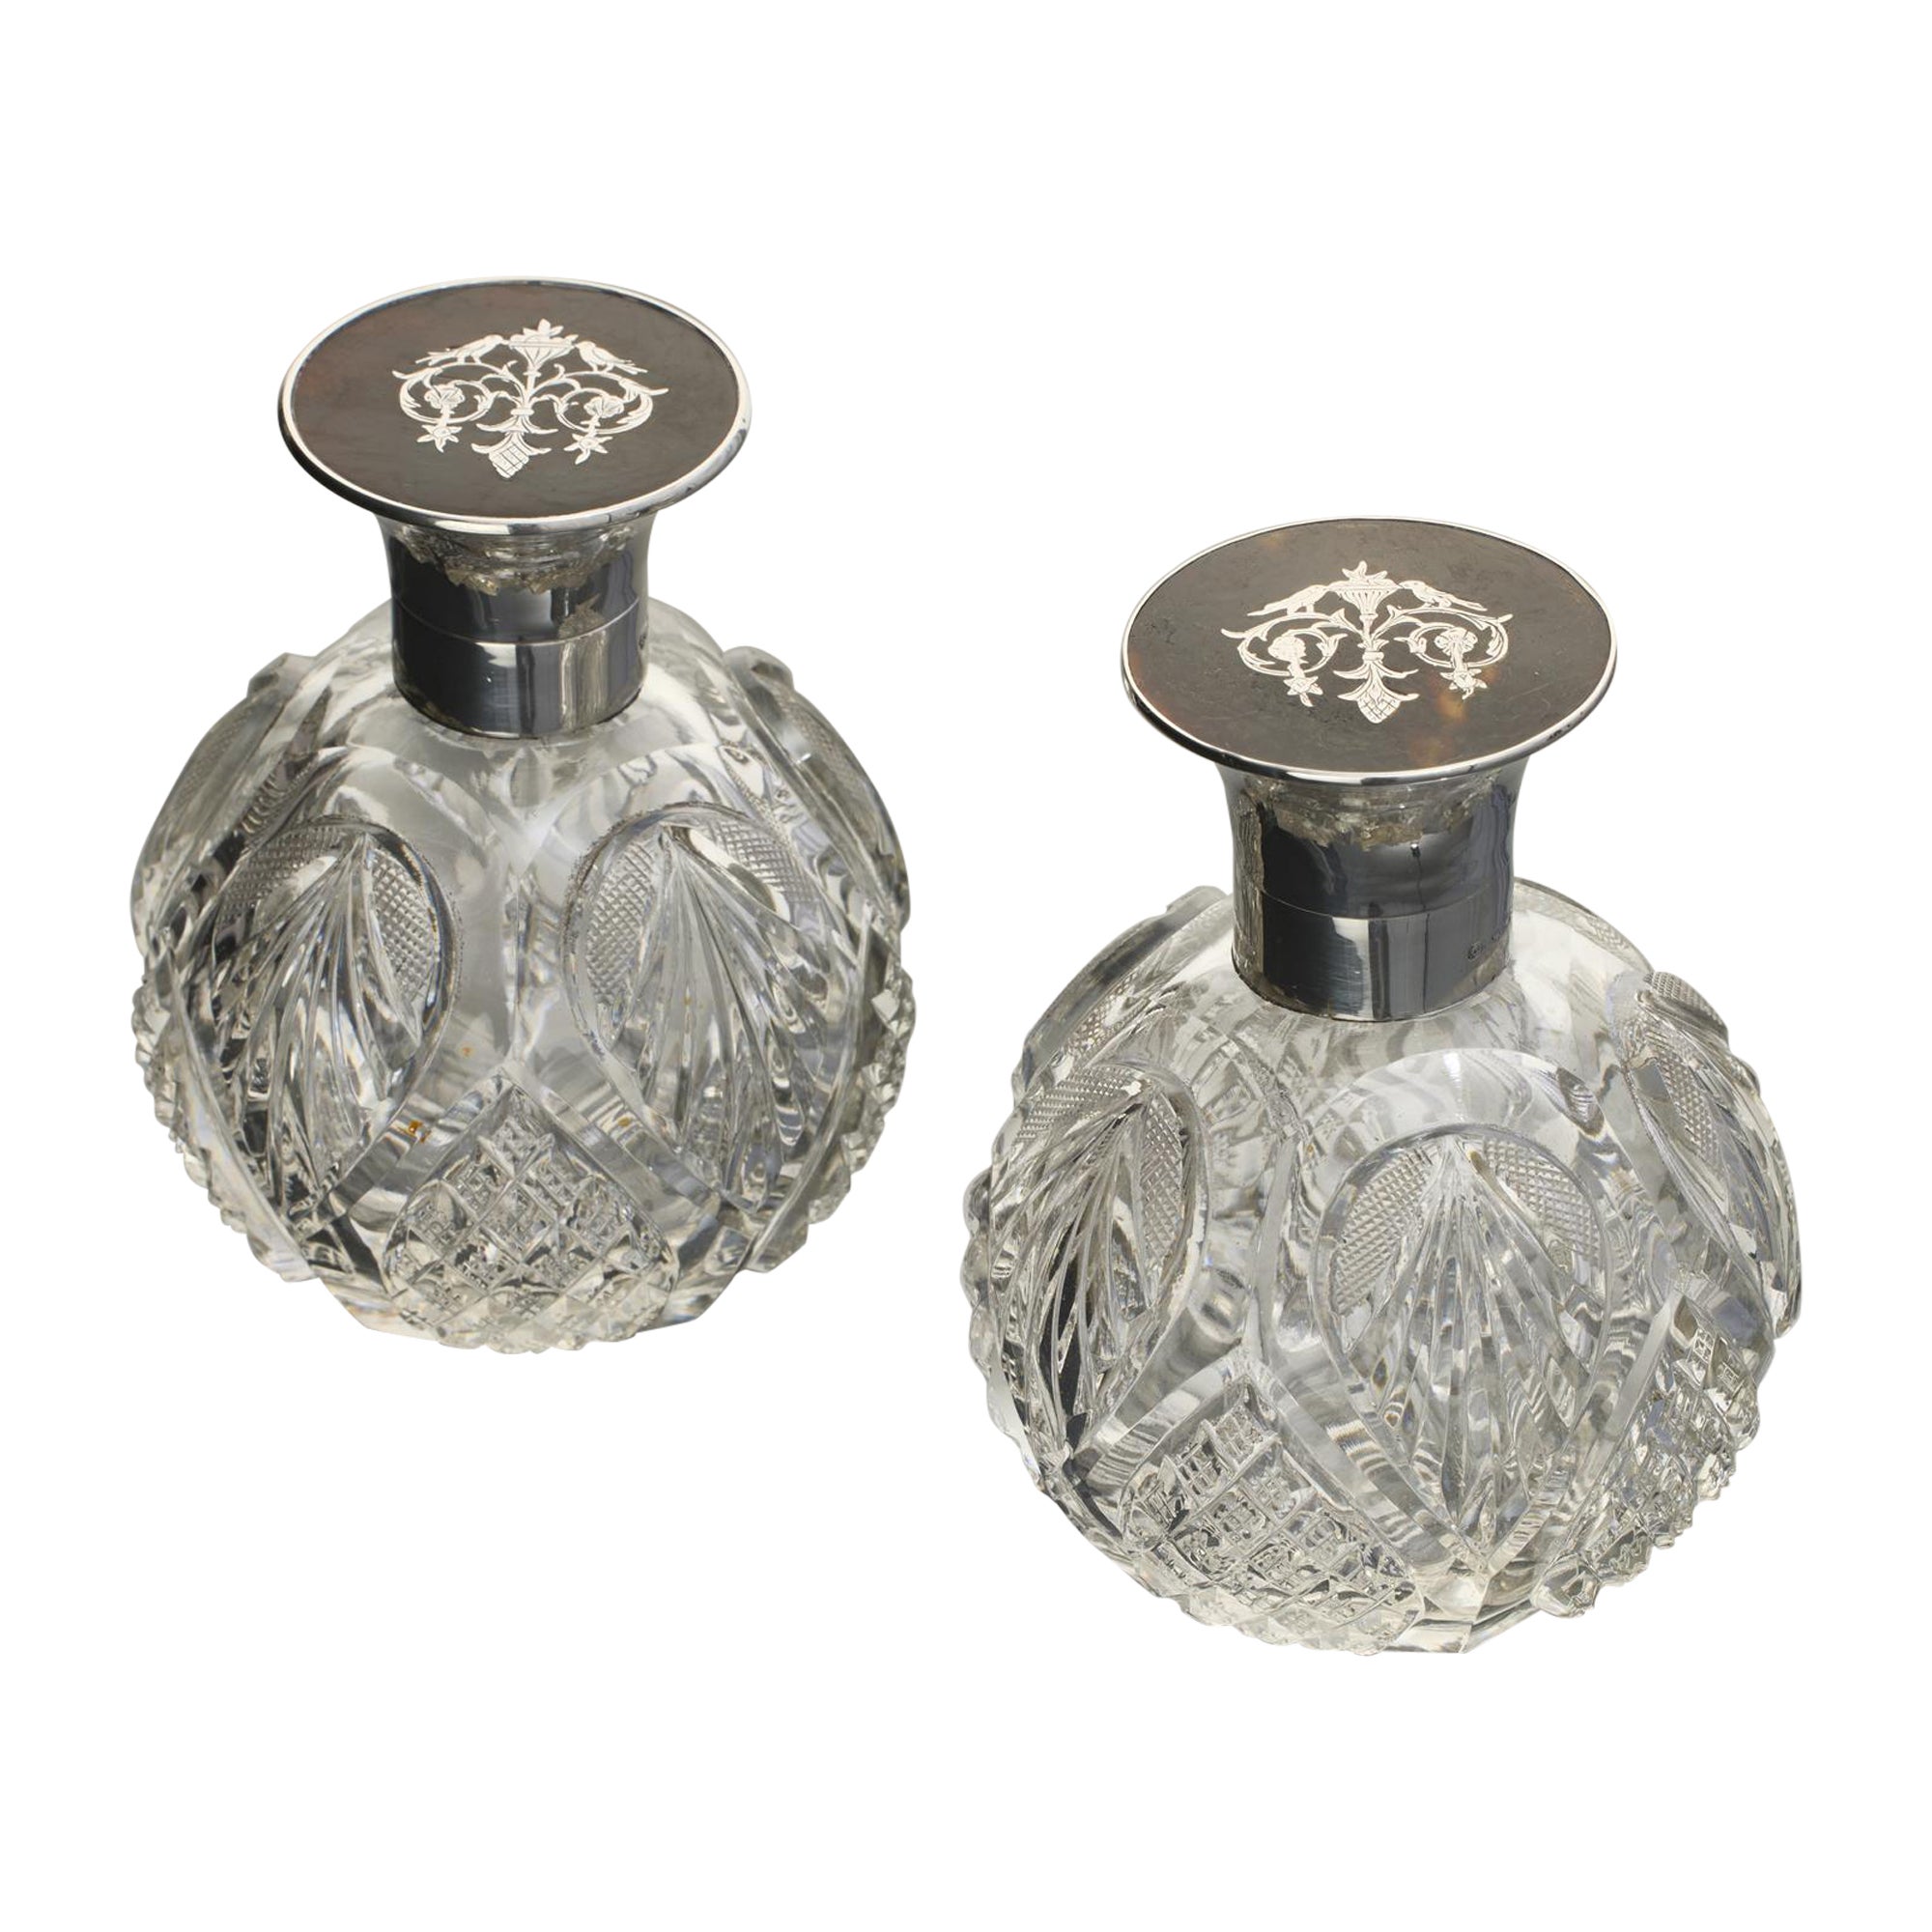 Pair of antique cut glass perfume bottles with silver & tortoiseshell covers For Sale